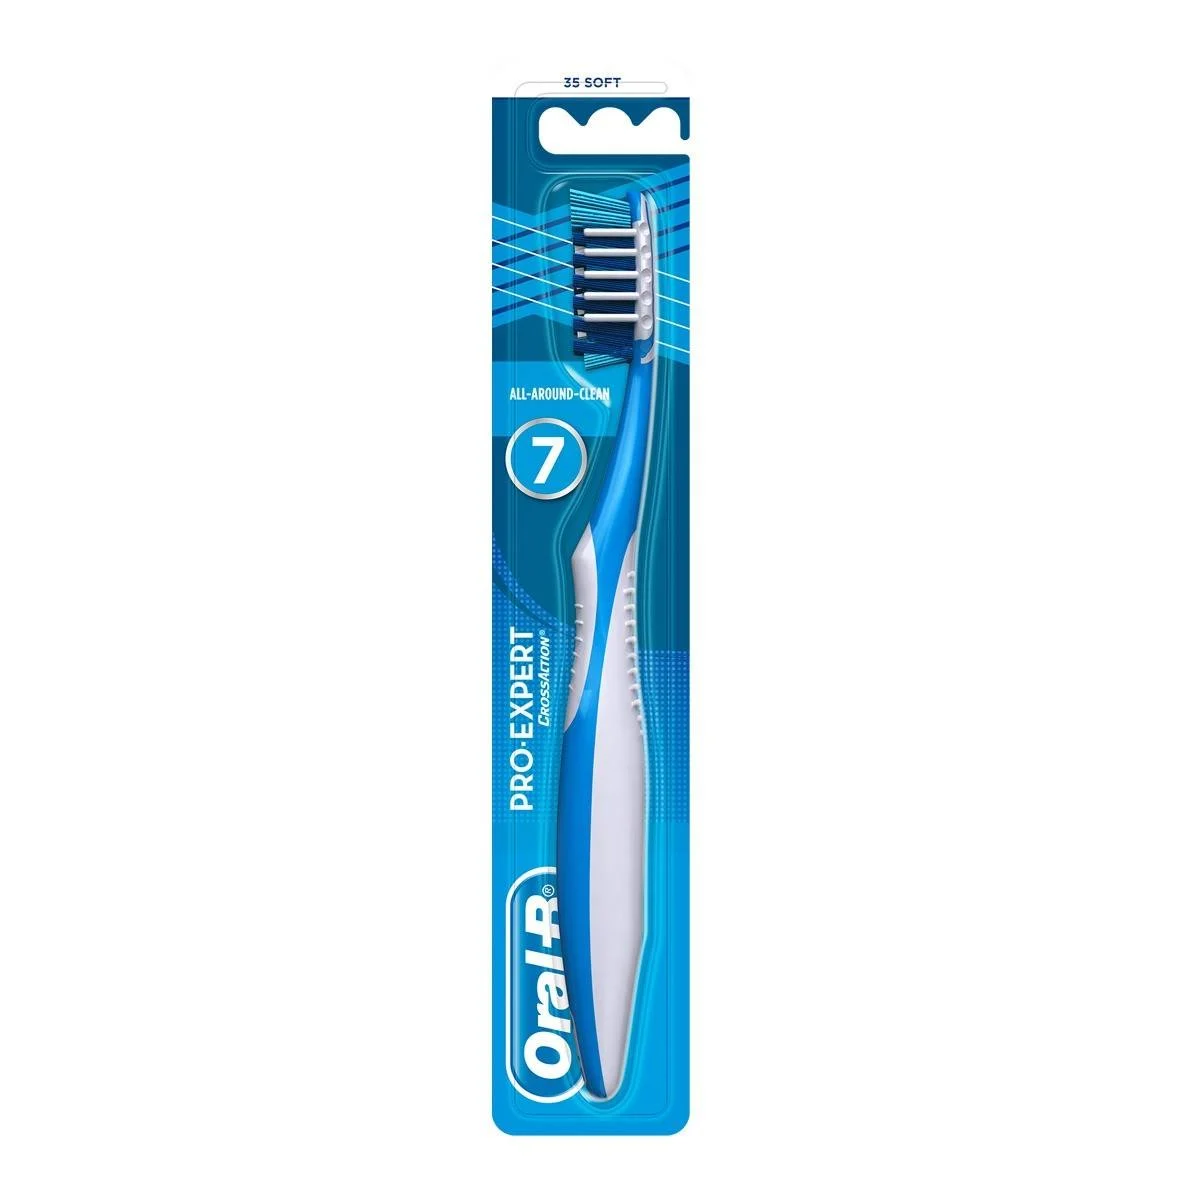 Oral-B Pro-Expert Complete 7 toothbrush 